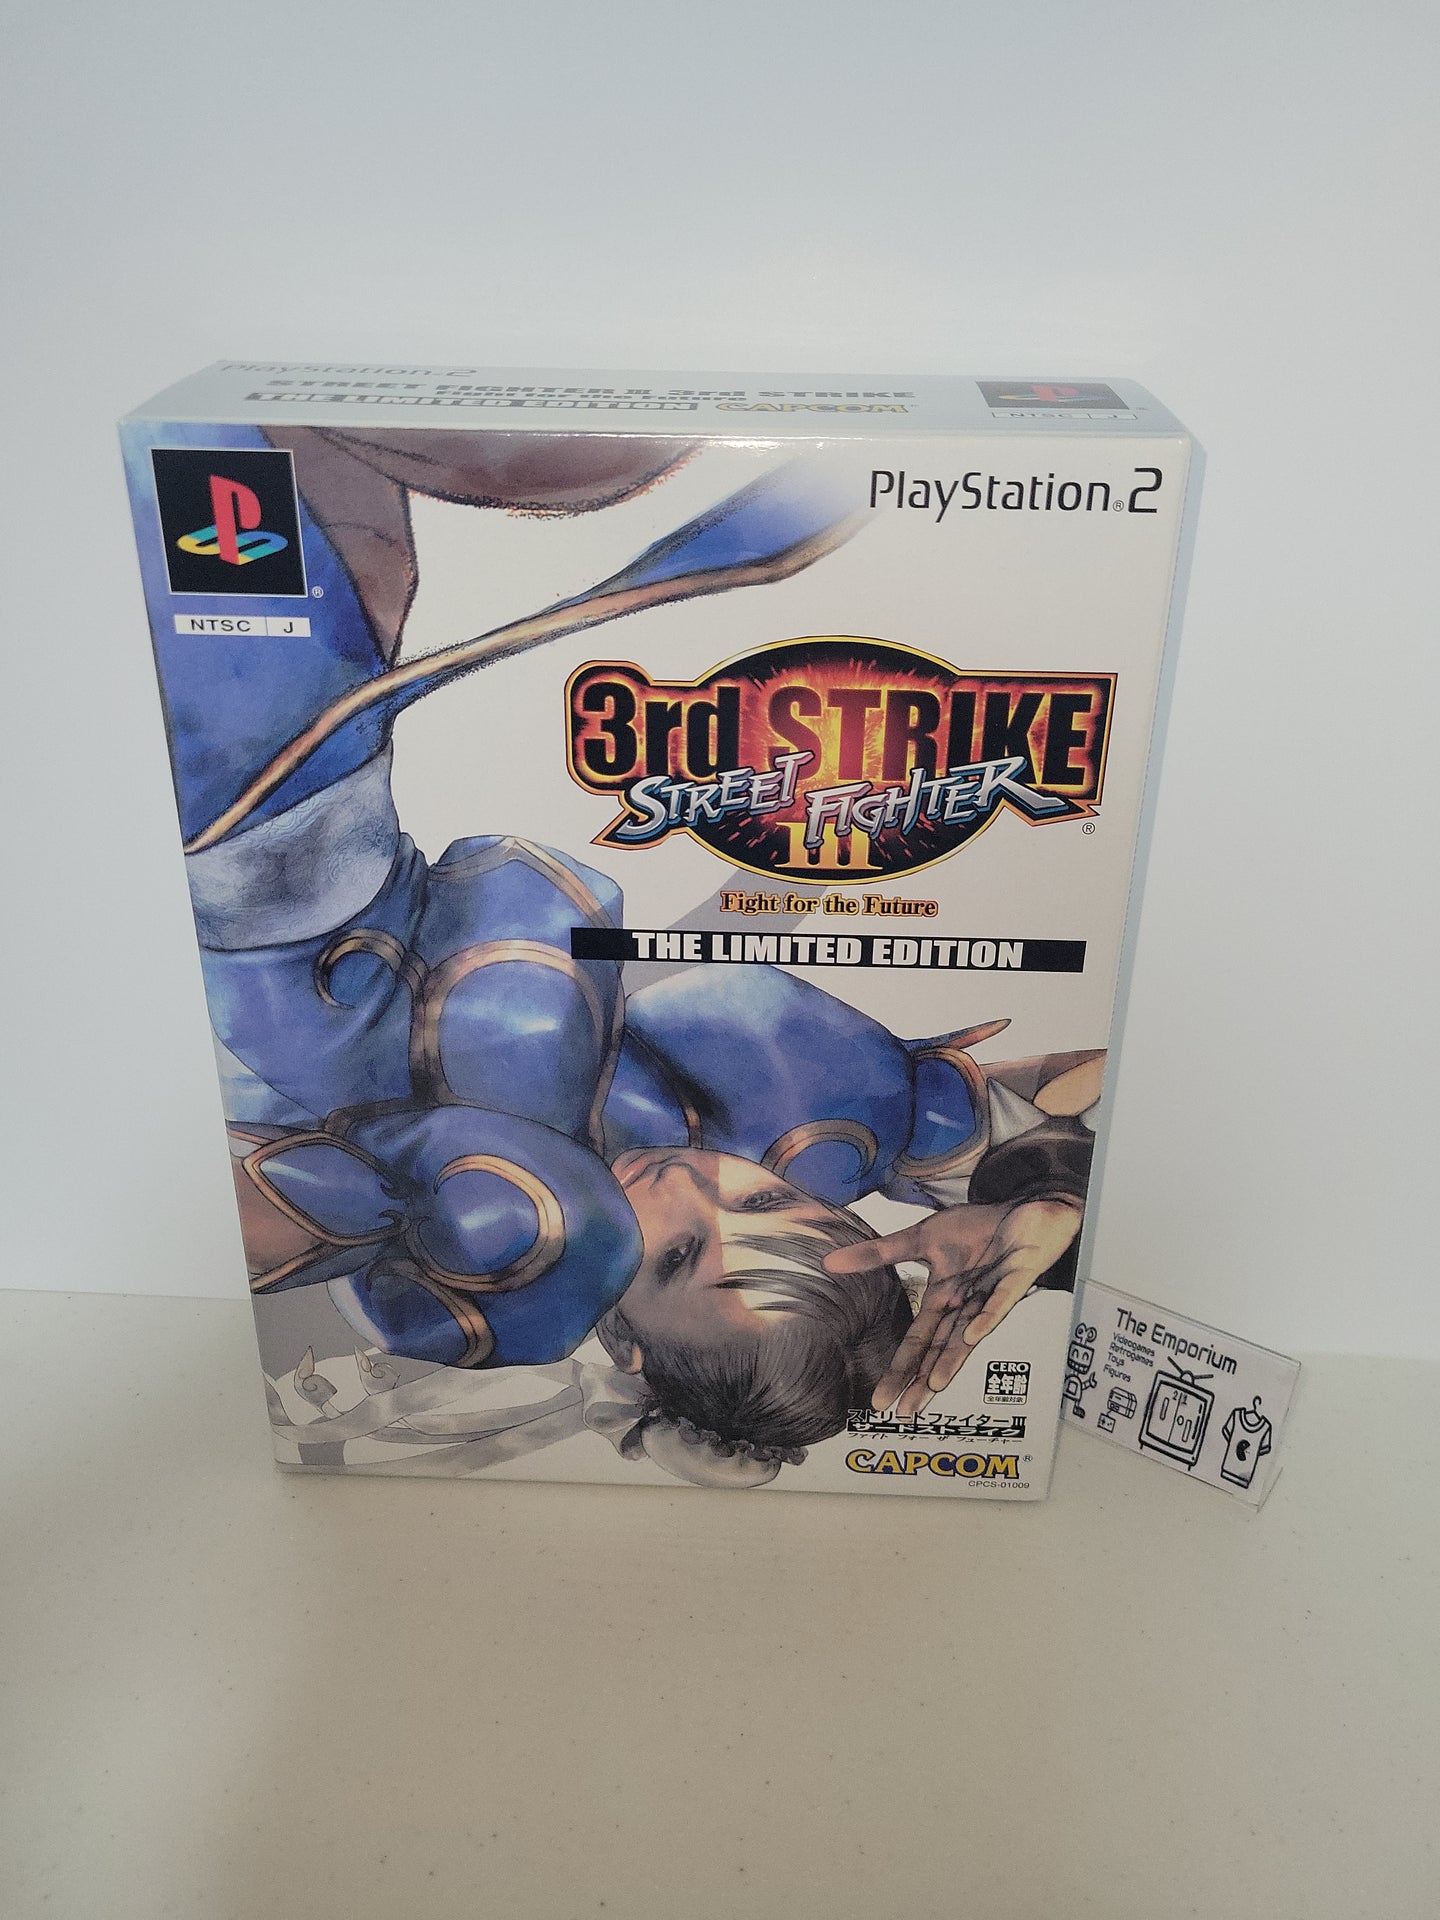 Street Fighter III 3rd Strike: Fight for the Future [Limited Edition] - Sony playstation 2